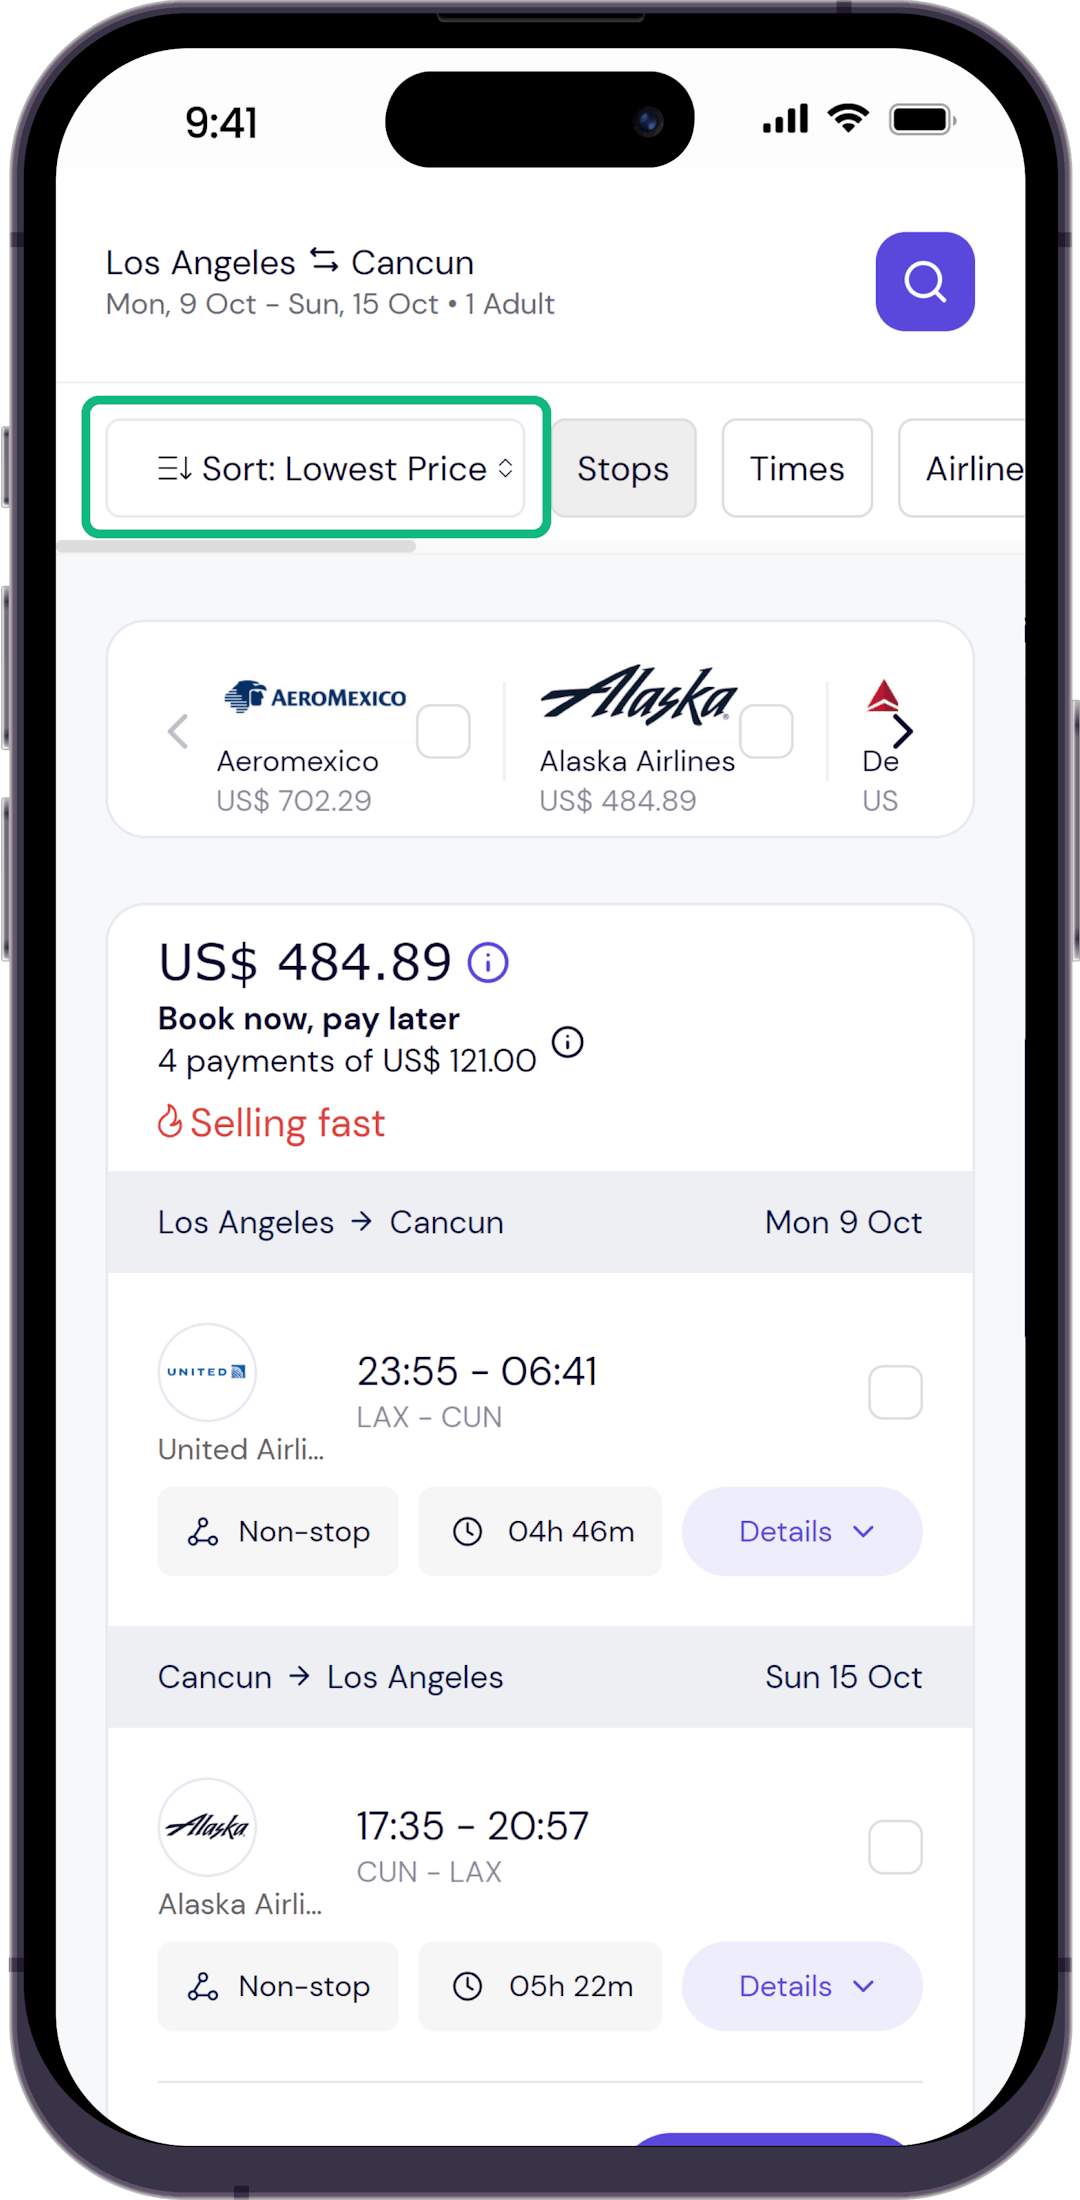 Sort flights by lowest/cheapest price